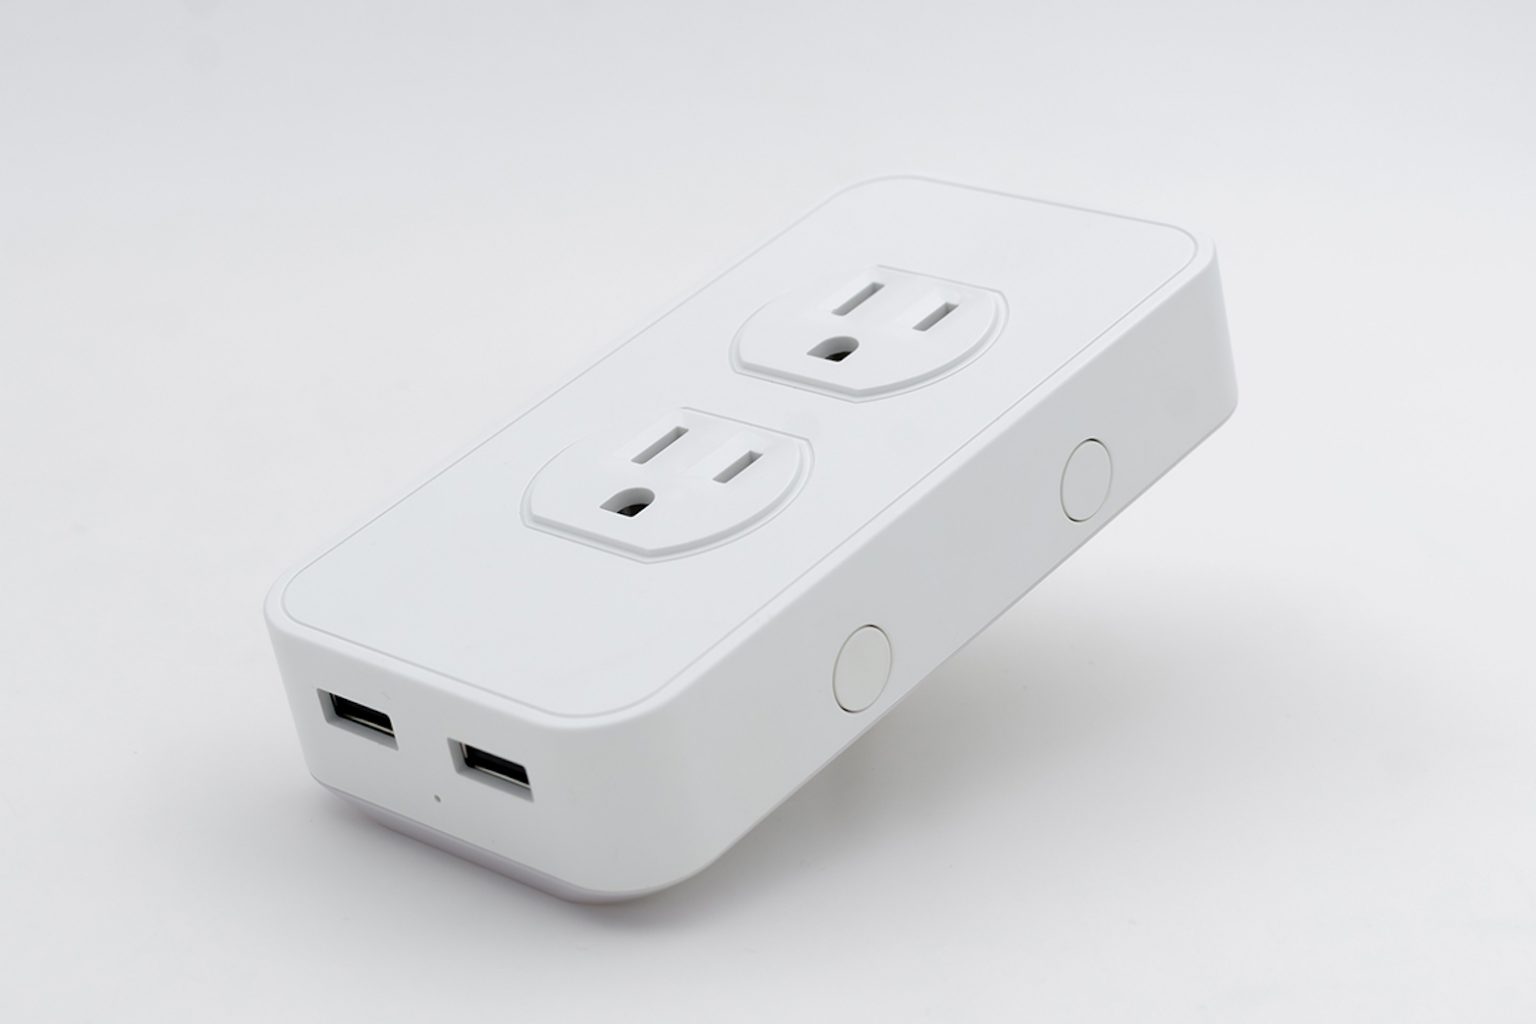 Turn your house into a smart home with this plug-and-go USB outlet